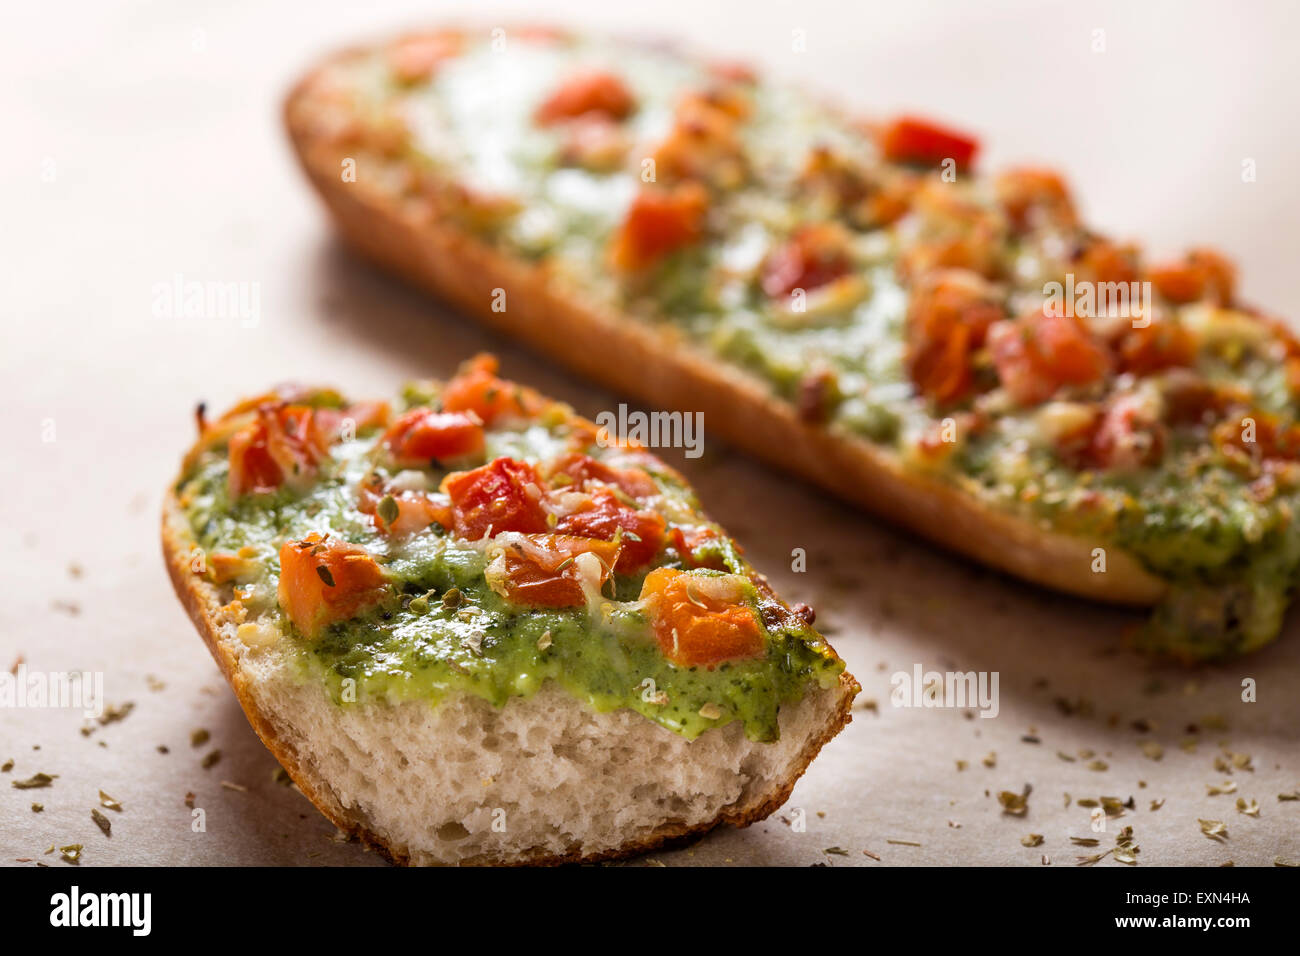 Close up of one bitten Baguette with pesto and spread oregano Stock Photo